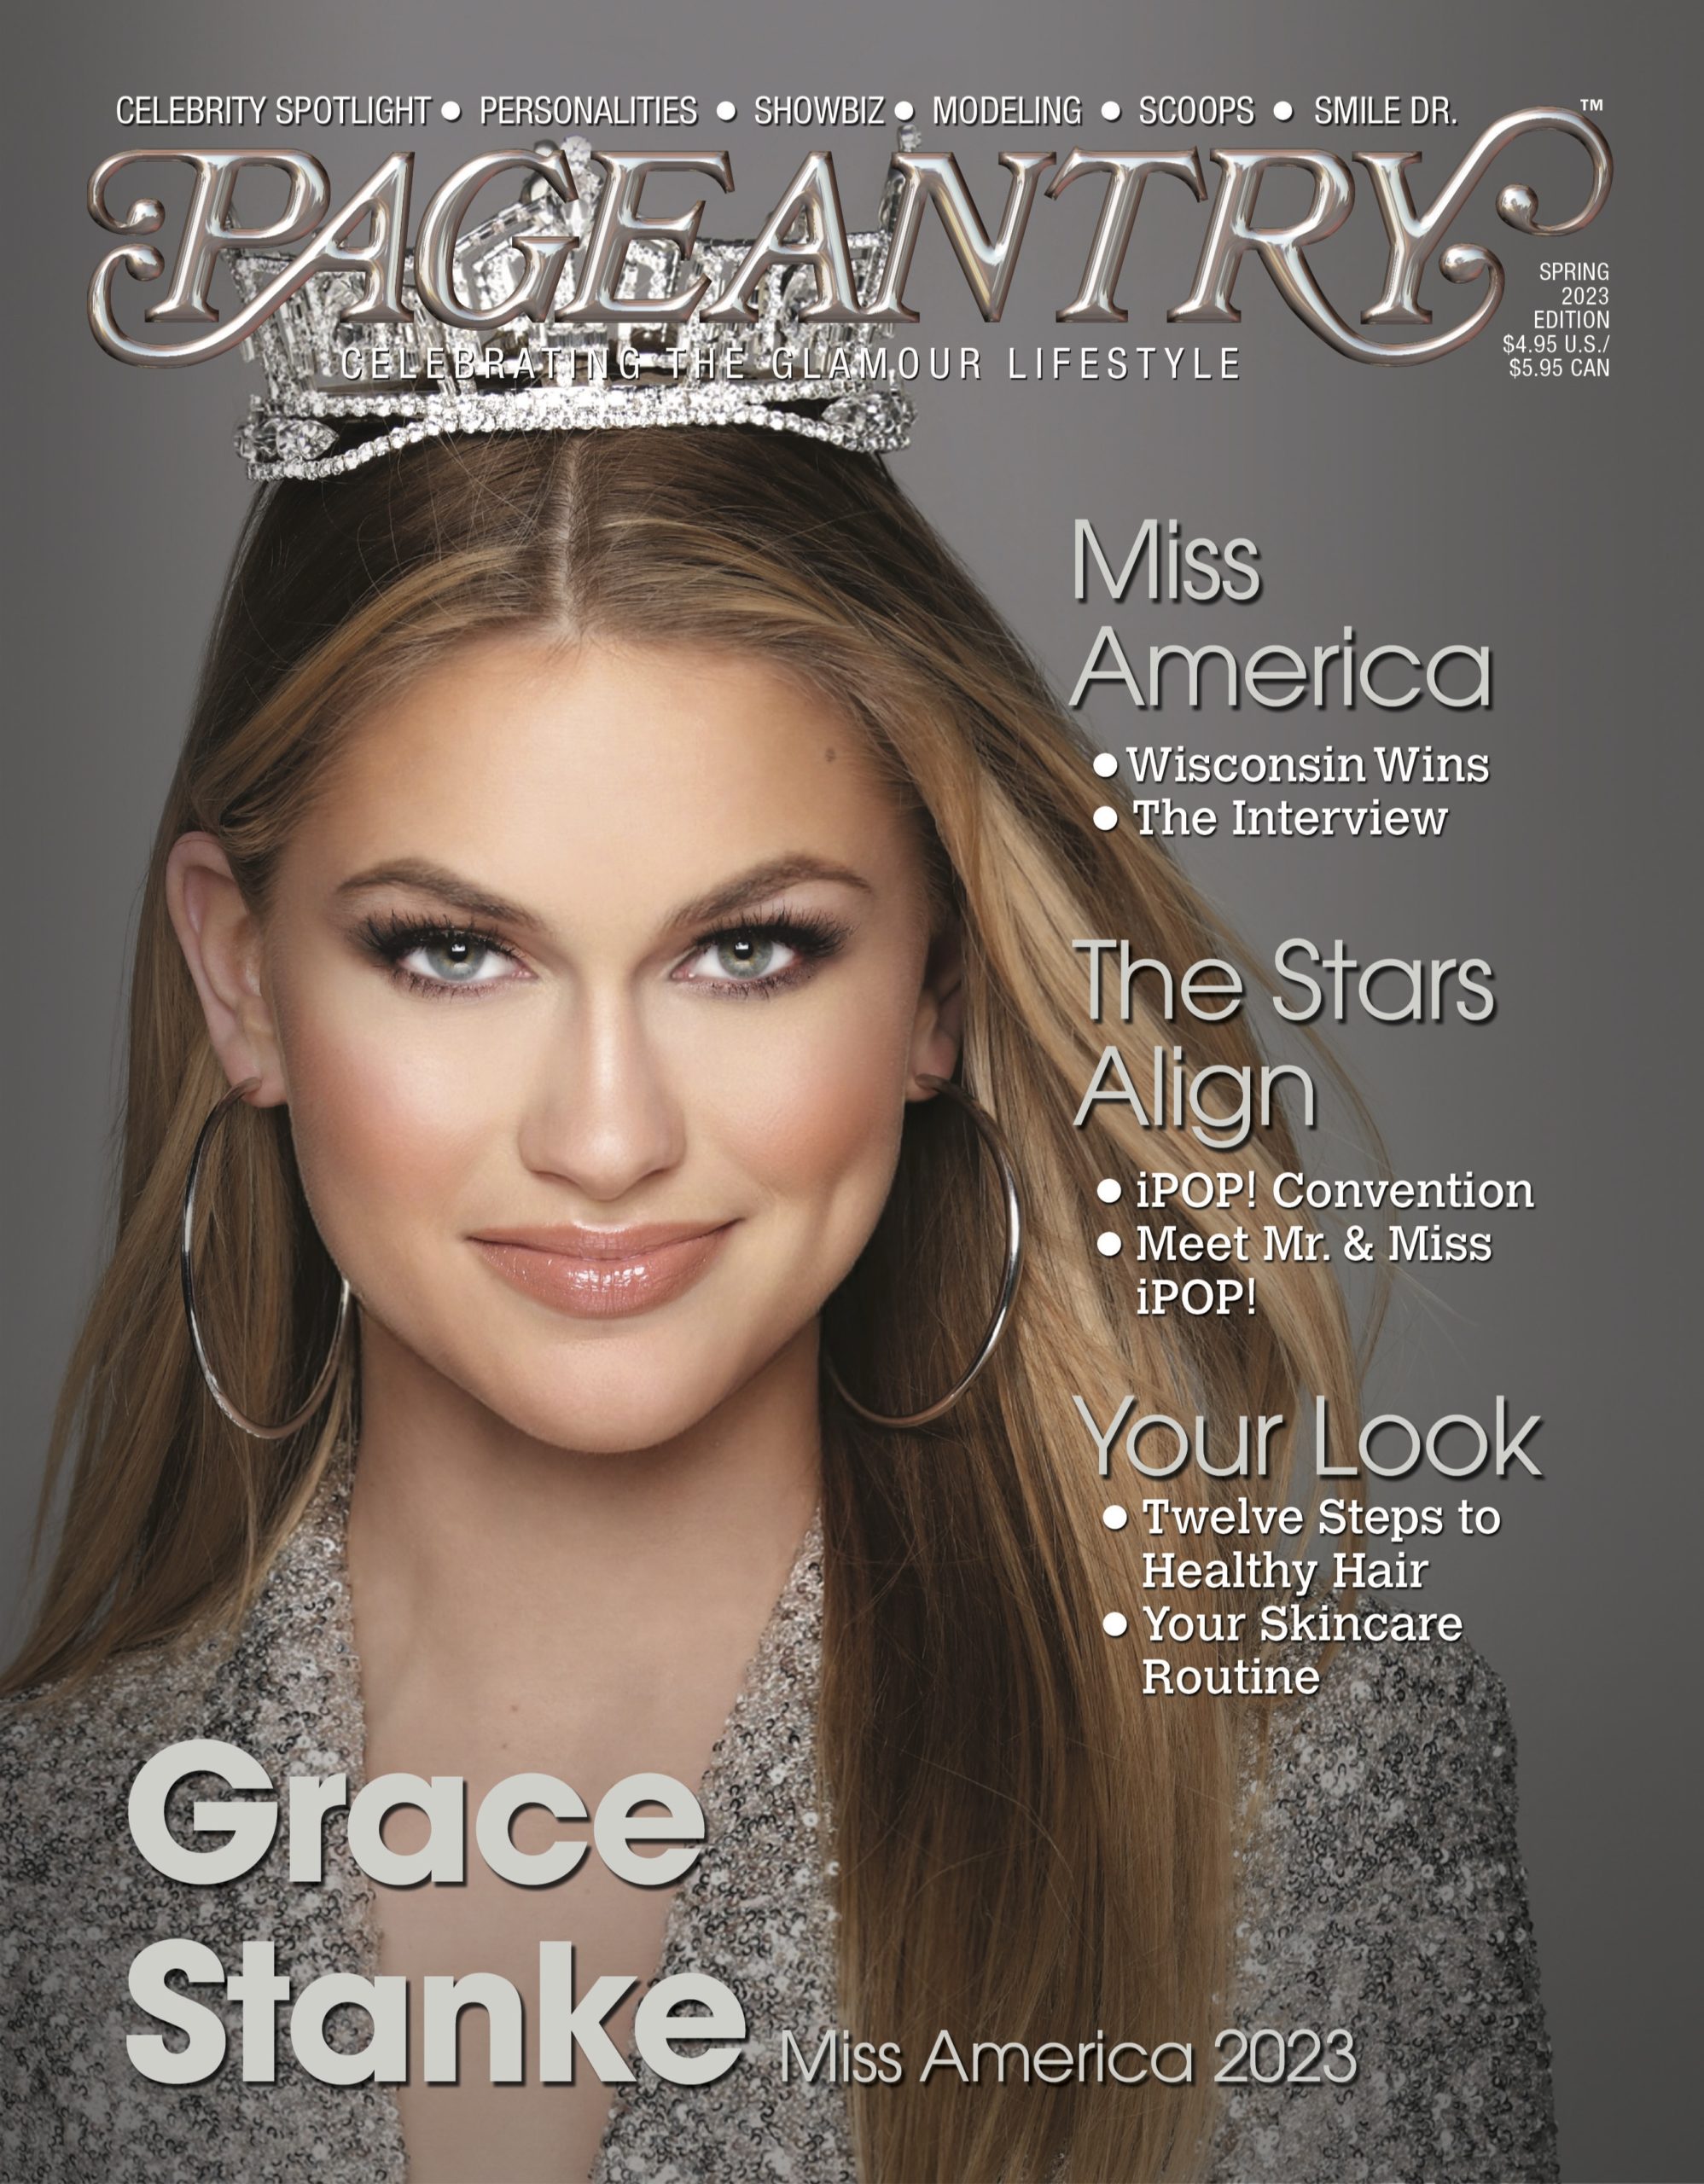 miss america, miss america pageant, mao, grace stanke, scholarship pageant, beauty pageant, pageant talent, scholarship competition, beauty queen, pageantry magazine, pageantry